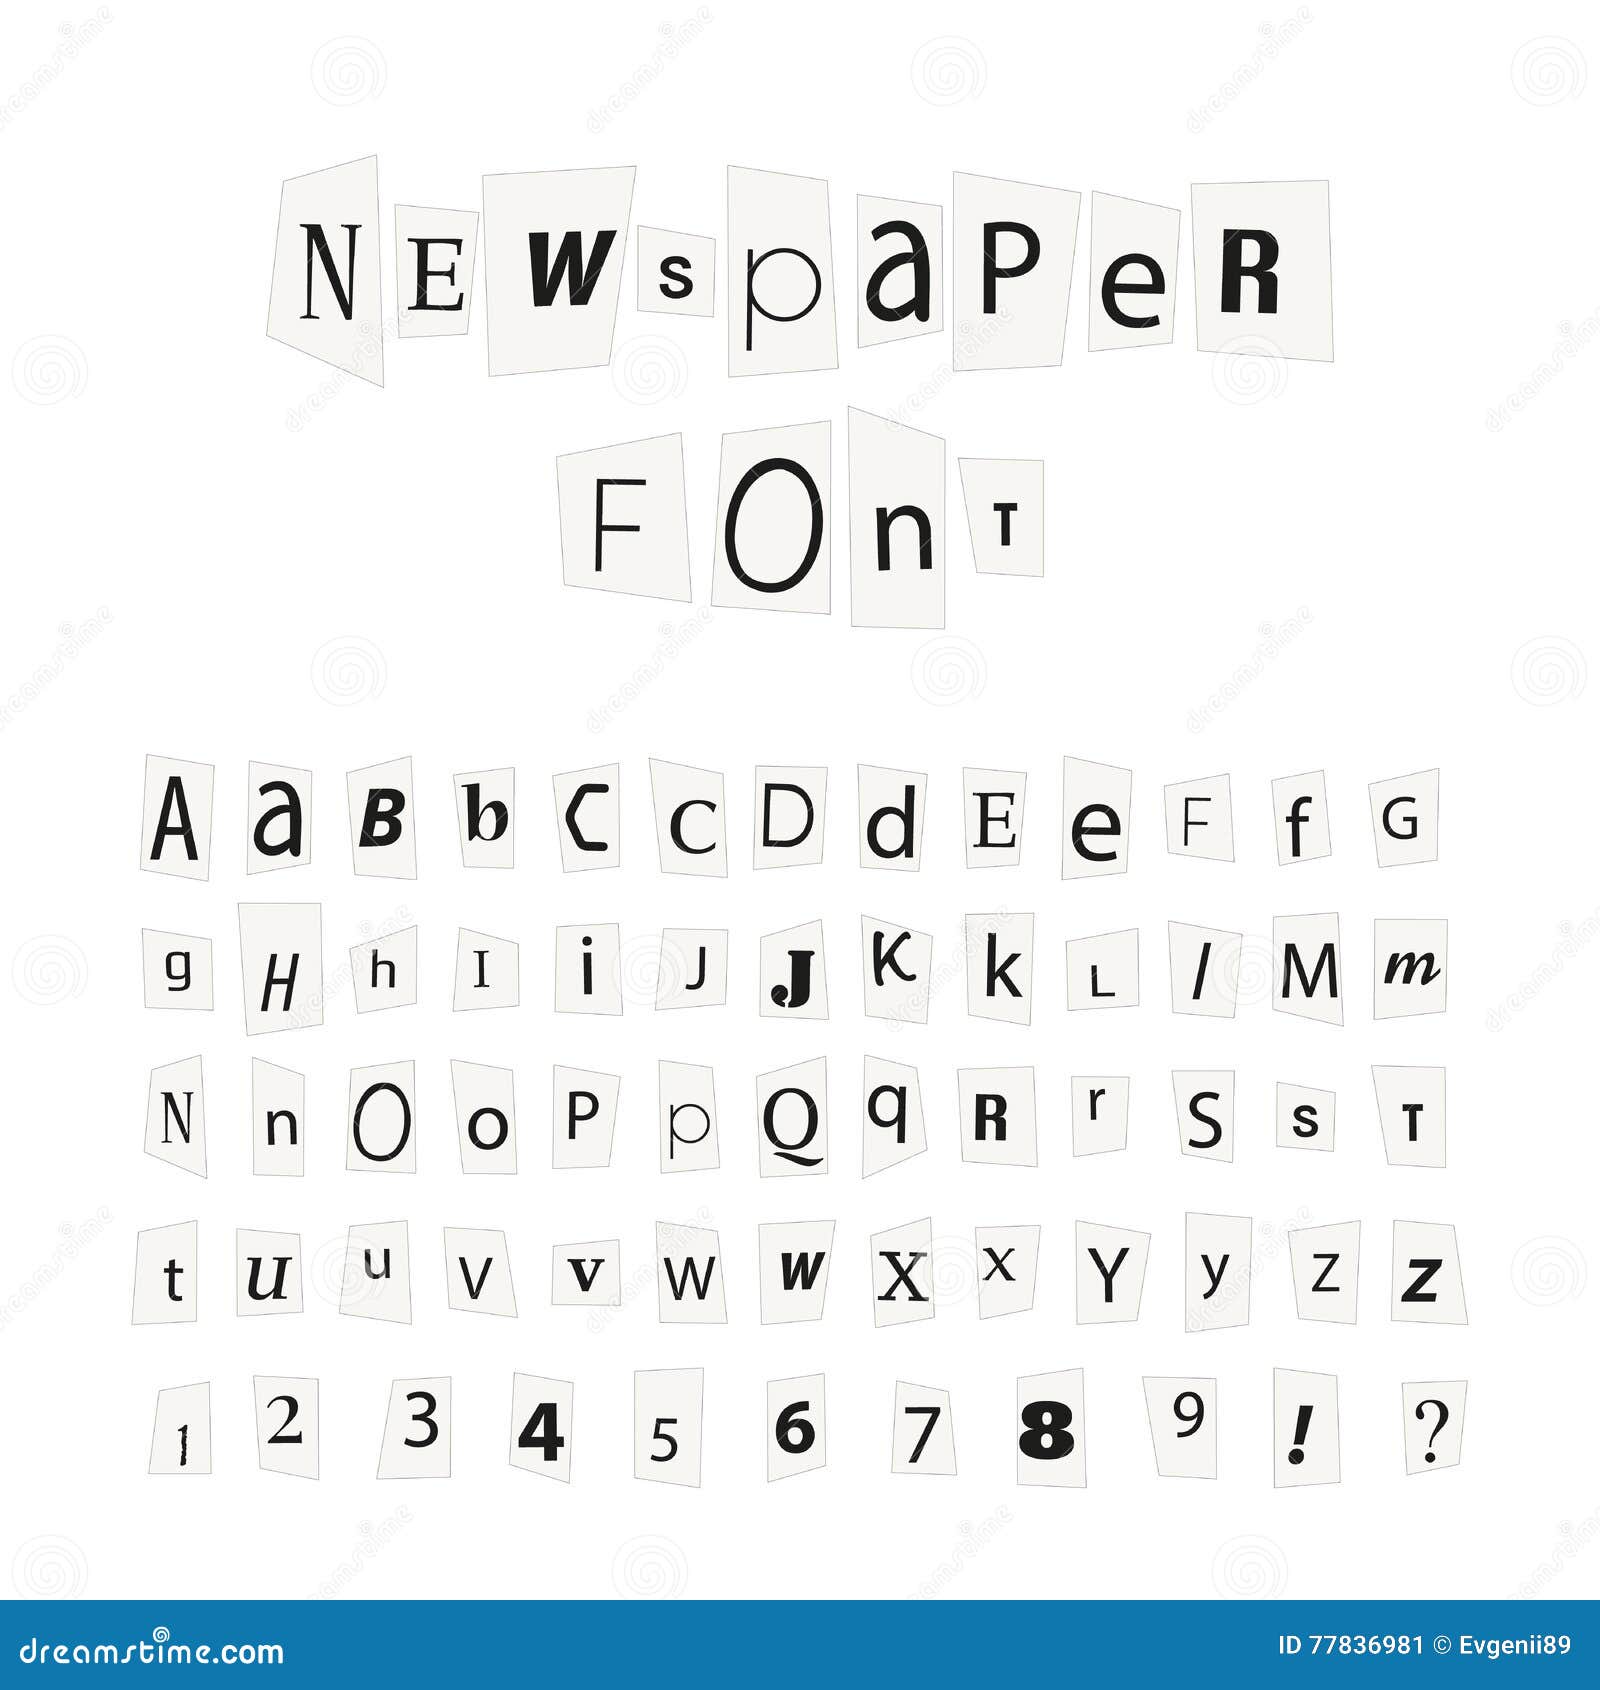 newspaper font generator, How to Create a Newspaper Note Text in Adobe ...